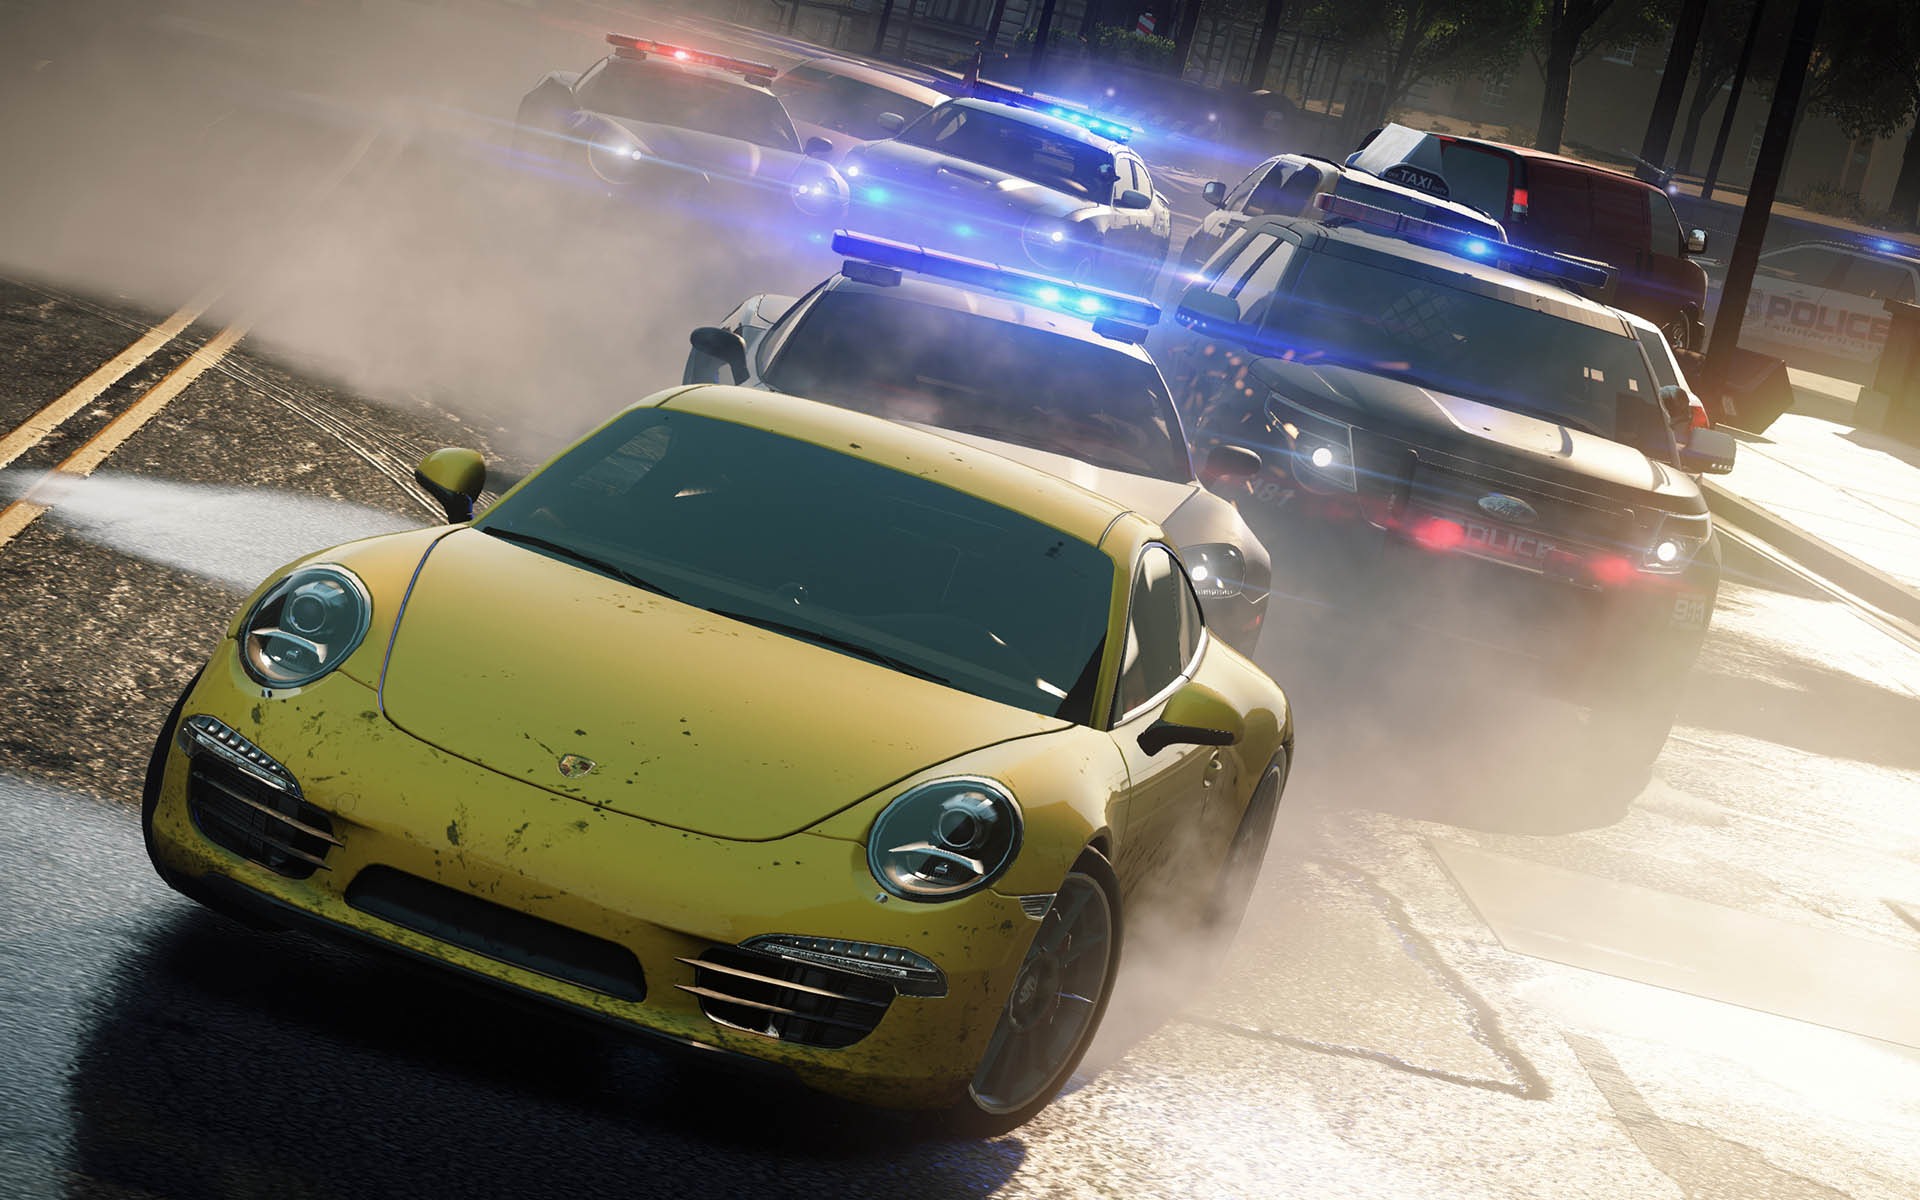 Need for Speed: Most Wanted 极品飞车17：最高通缉 高清壁纸15 - 1920x1200